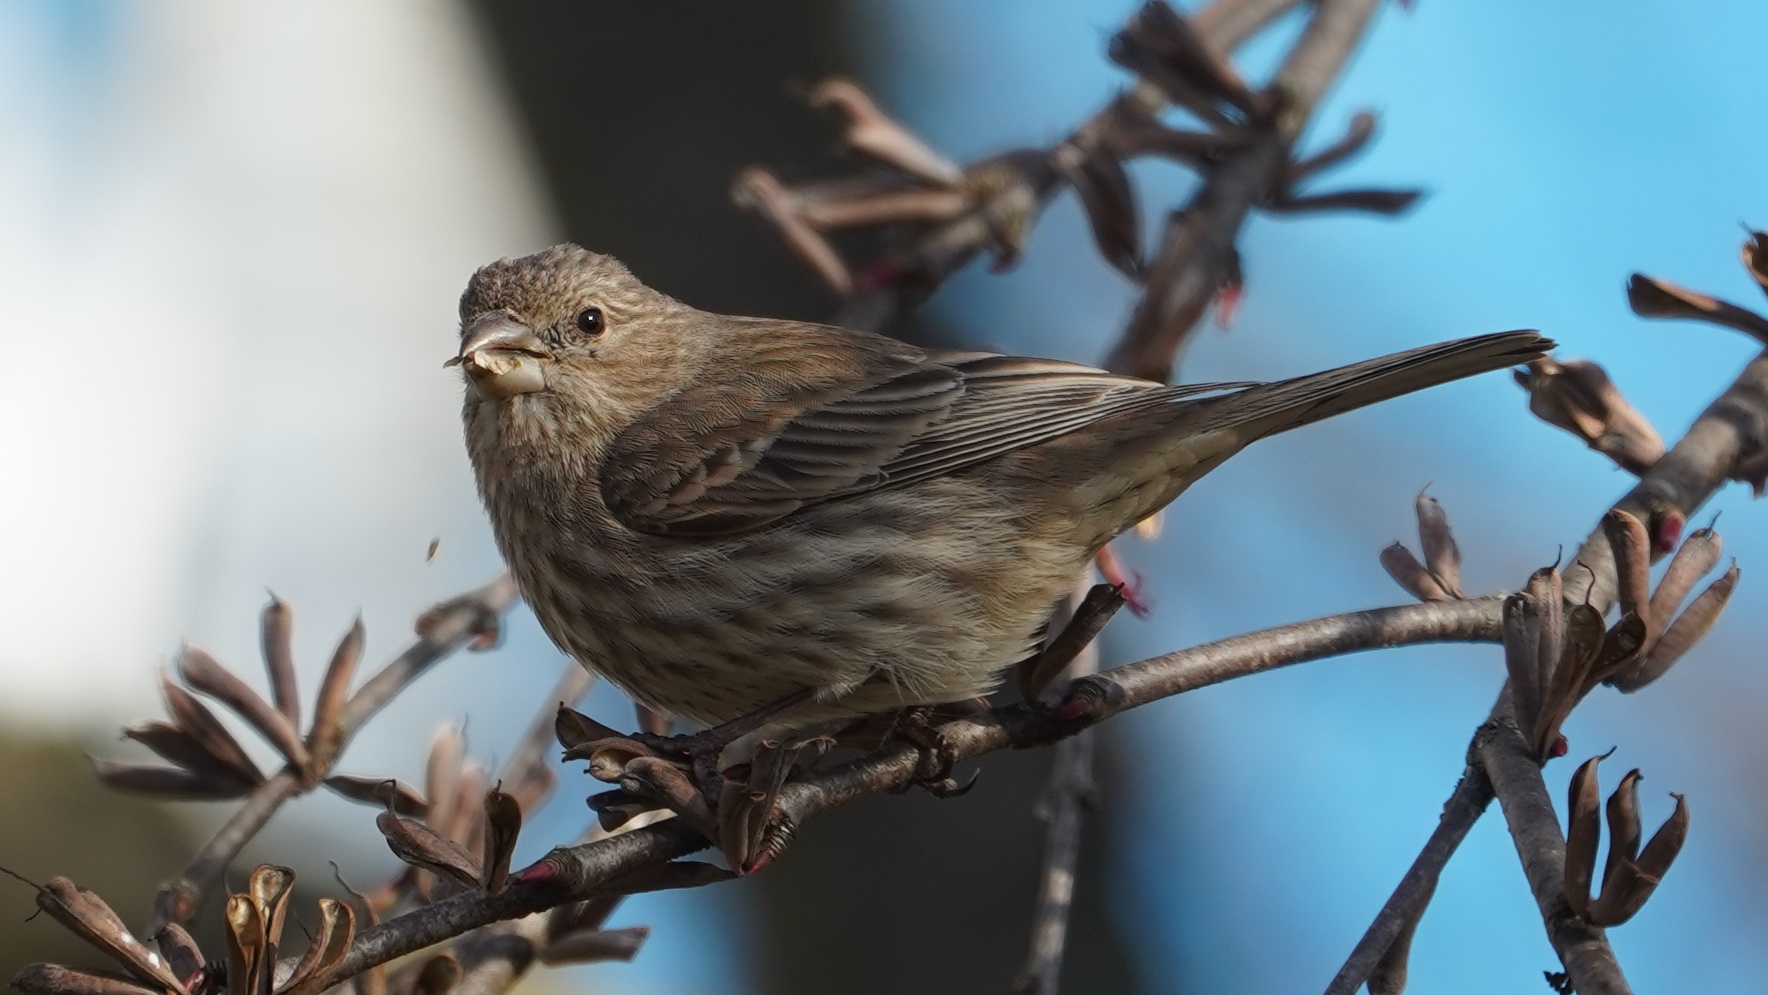 Female house finch, seed in mouth